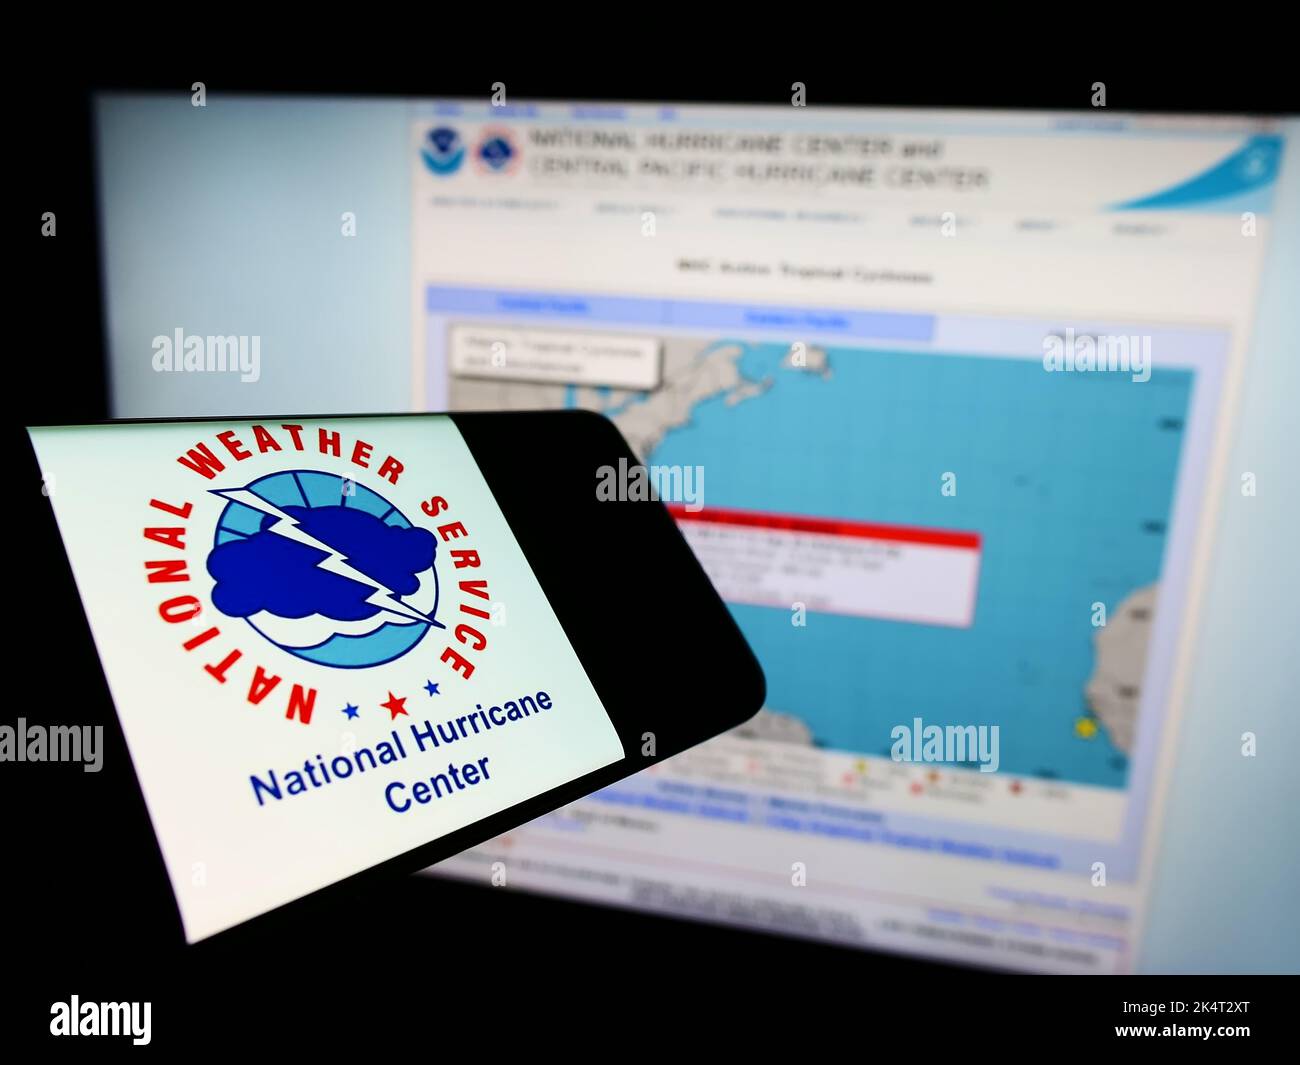 Cellphone with logo of US NWS division National Hurricane Center (NHC) on screen in front of website. Focus on center-right of phone display. Stock Photo